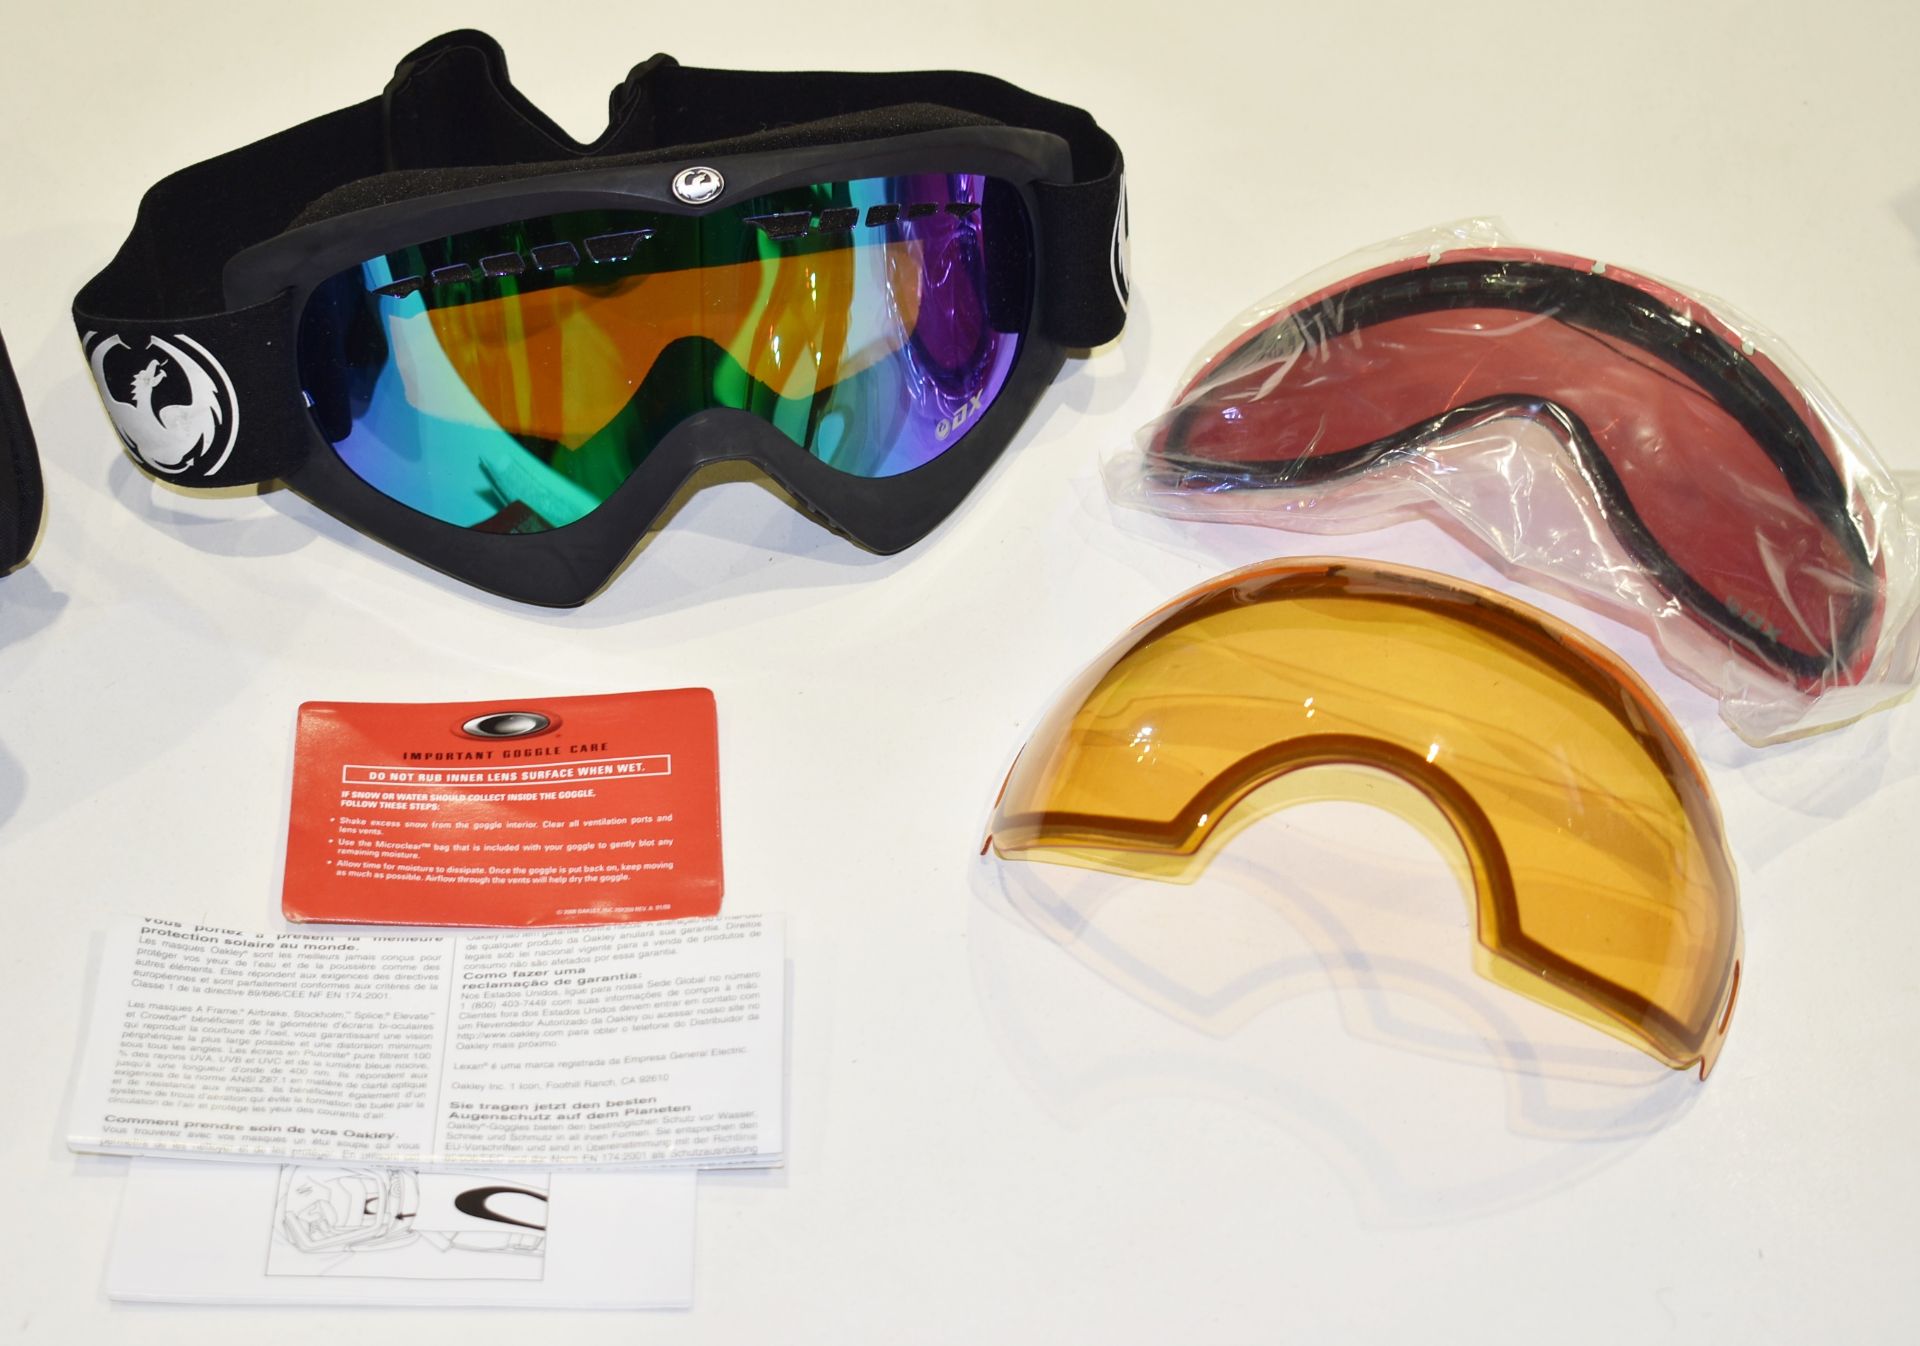 1 x Pair of Oakely Snow Goggles With Interchangeable Lenses and Carry Case - CL431 - Ref CB142 -